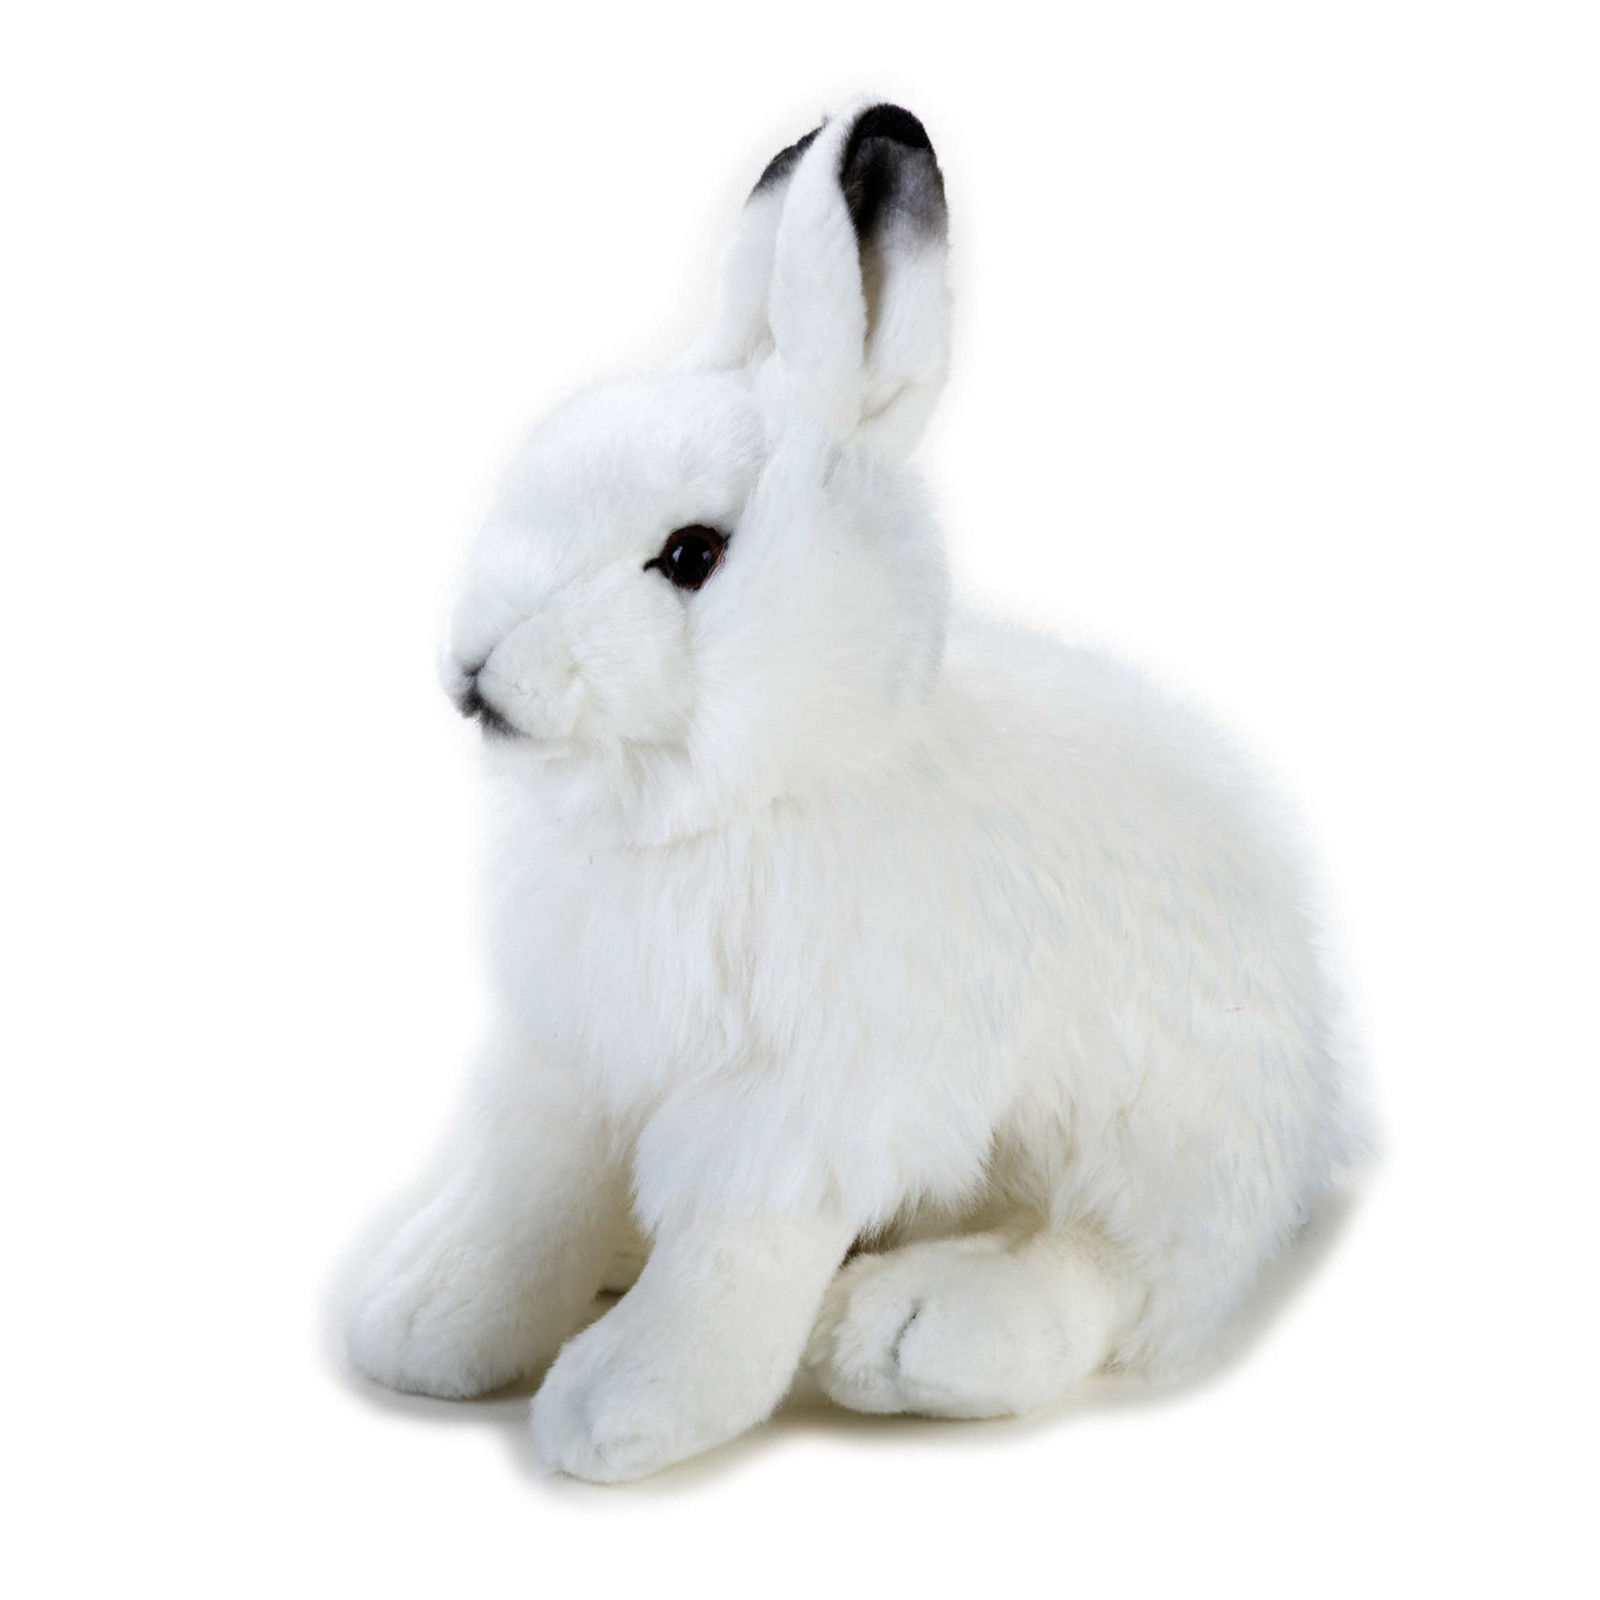 Lelly - National Geographic Plush Arctic Hare | eBay